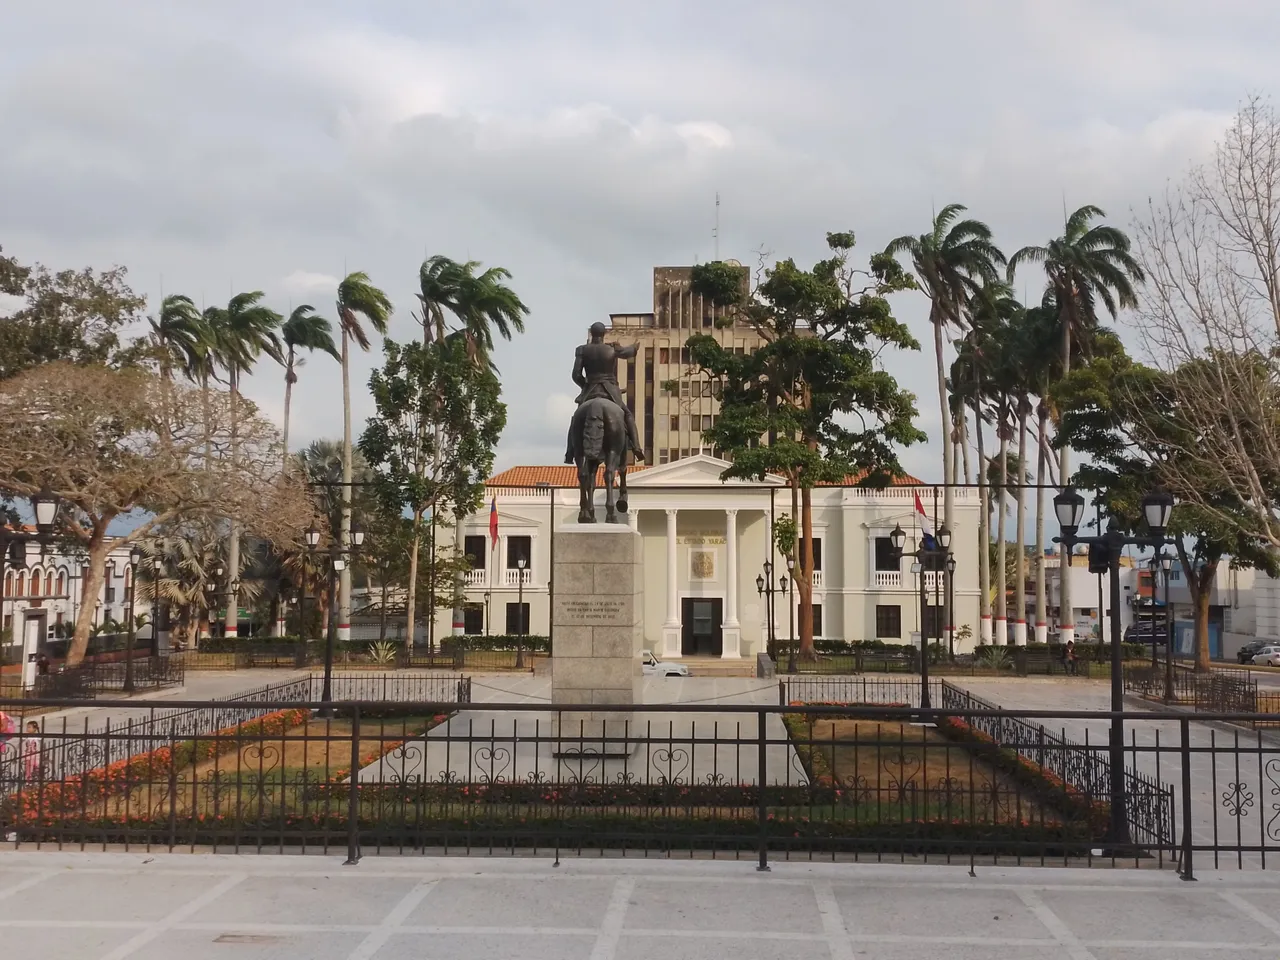 "Plaza Bolivar" and Other Government Buildings